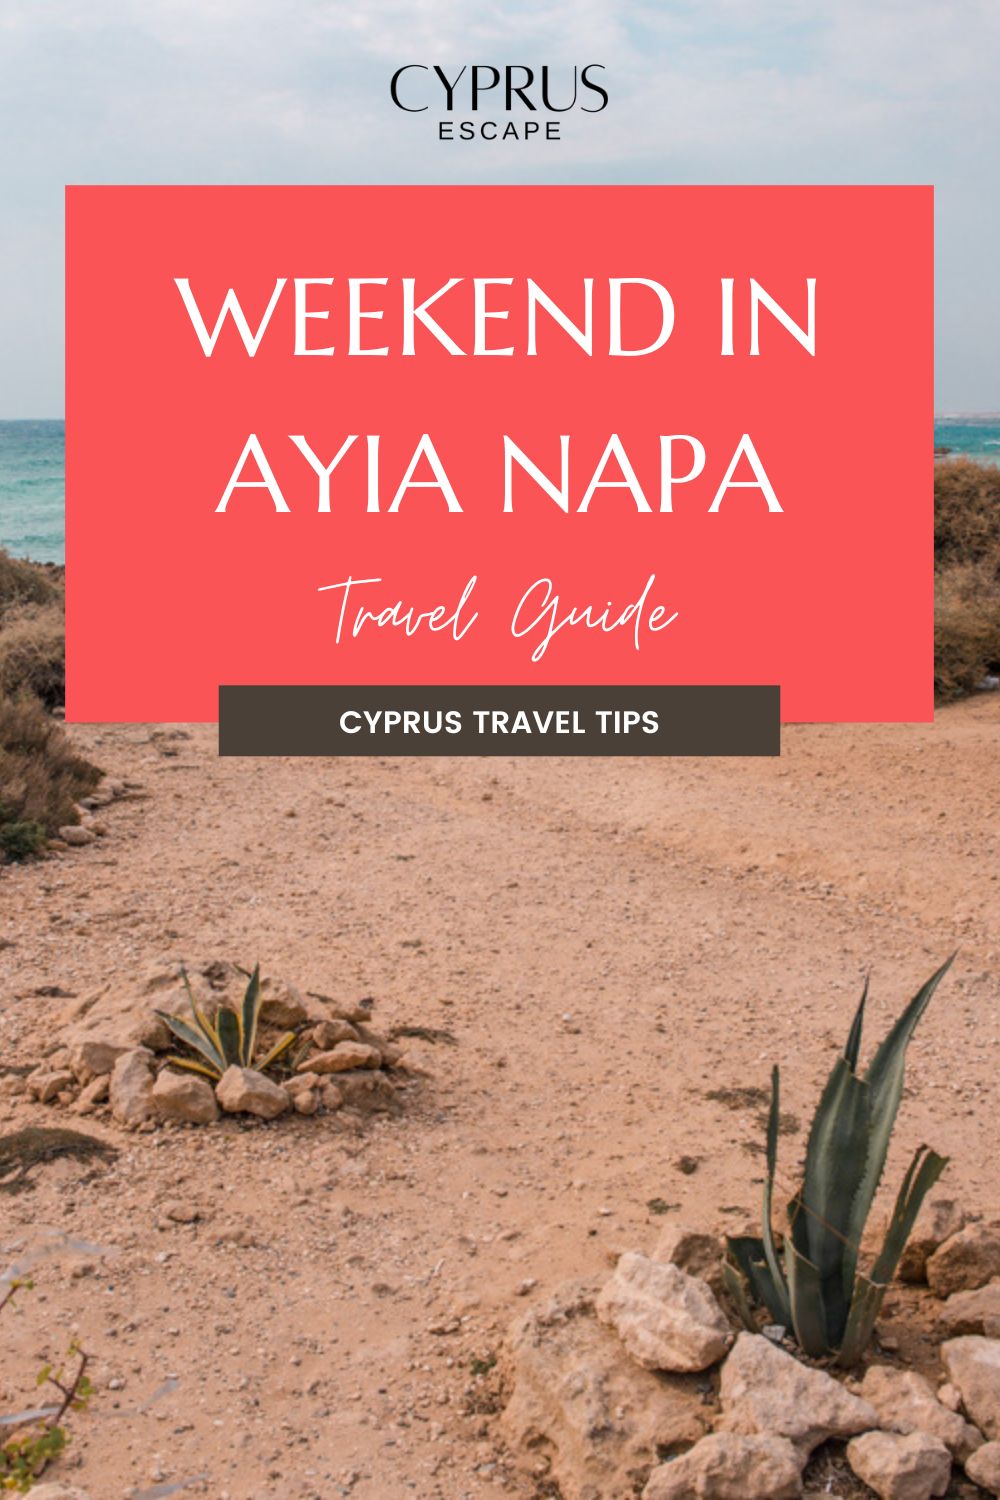 Pinterest Image For an Article About Weekend in Ayia Napa